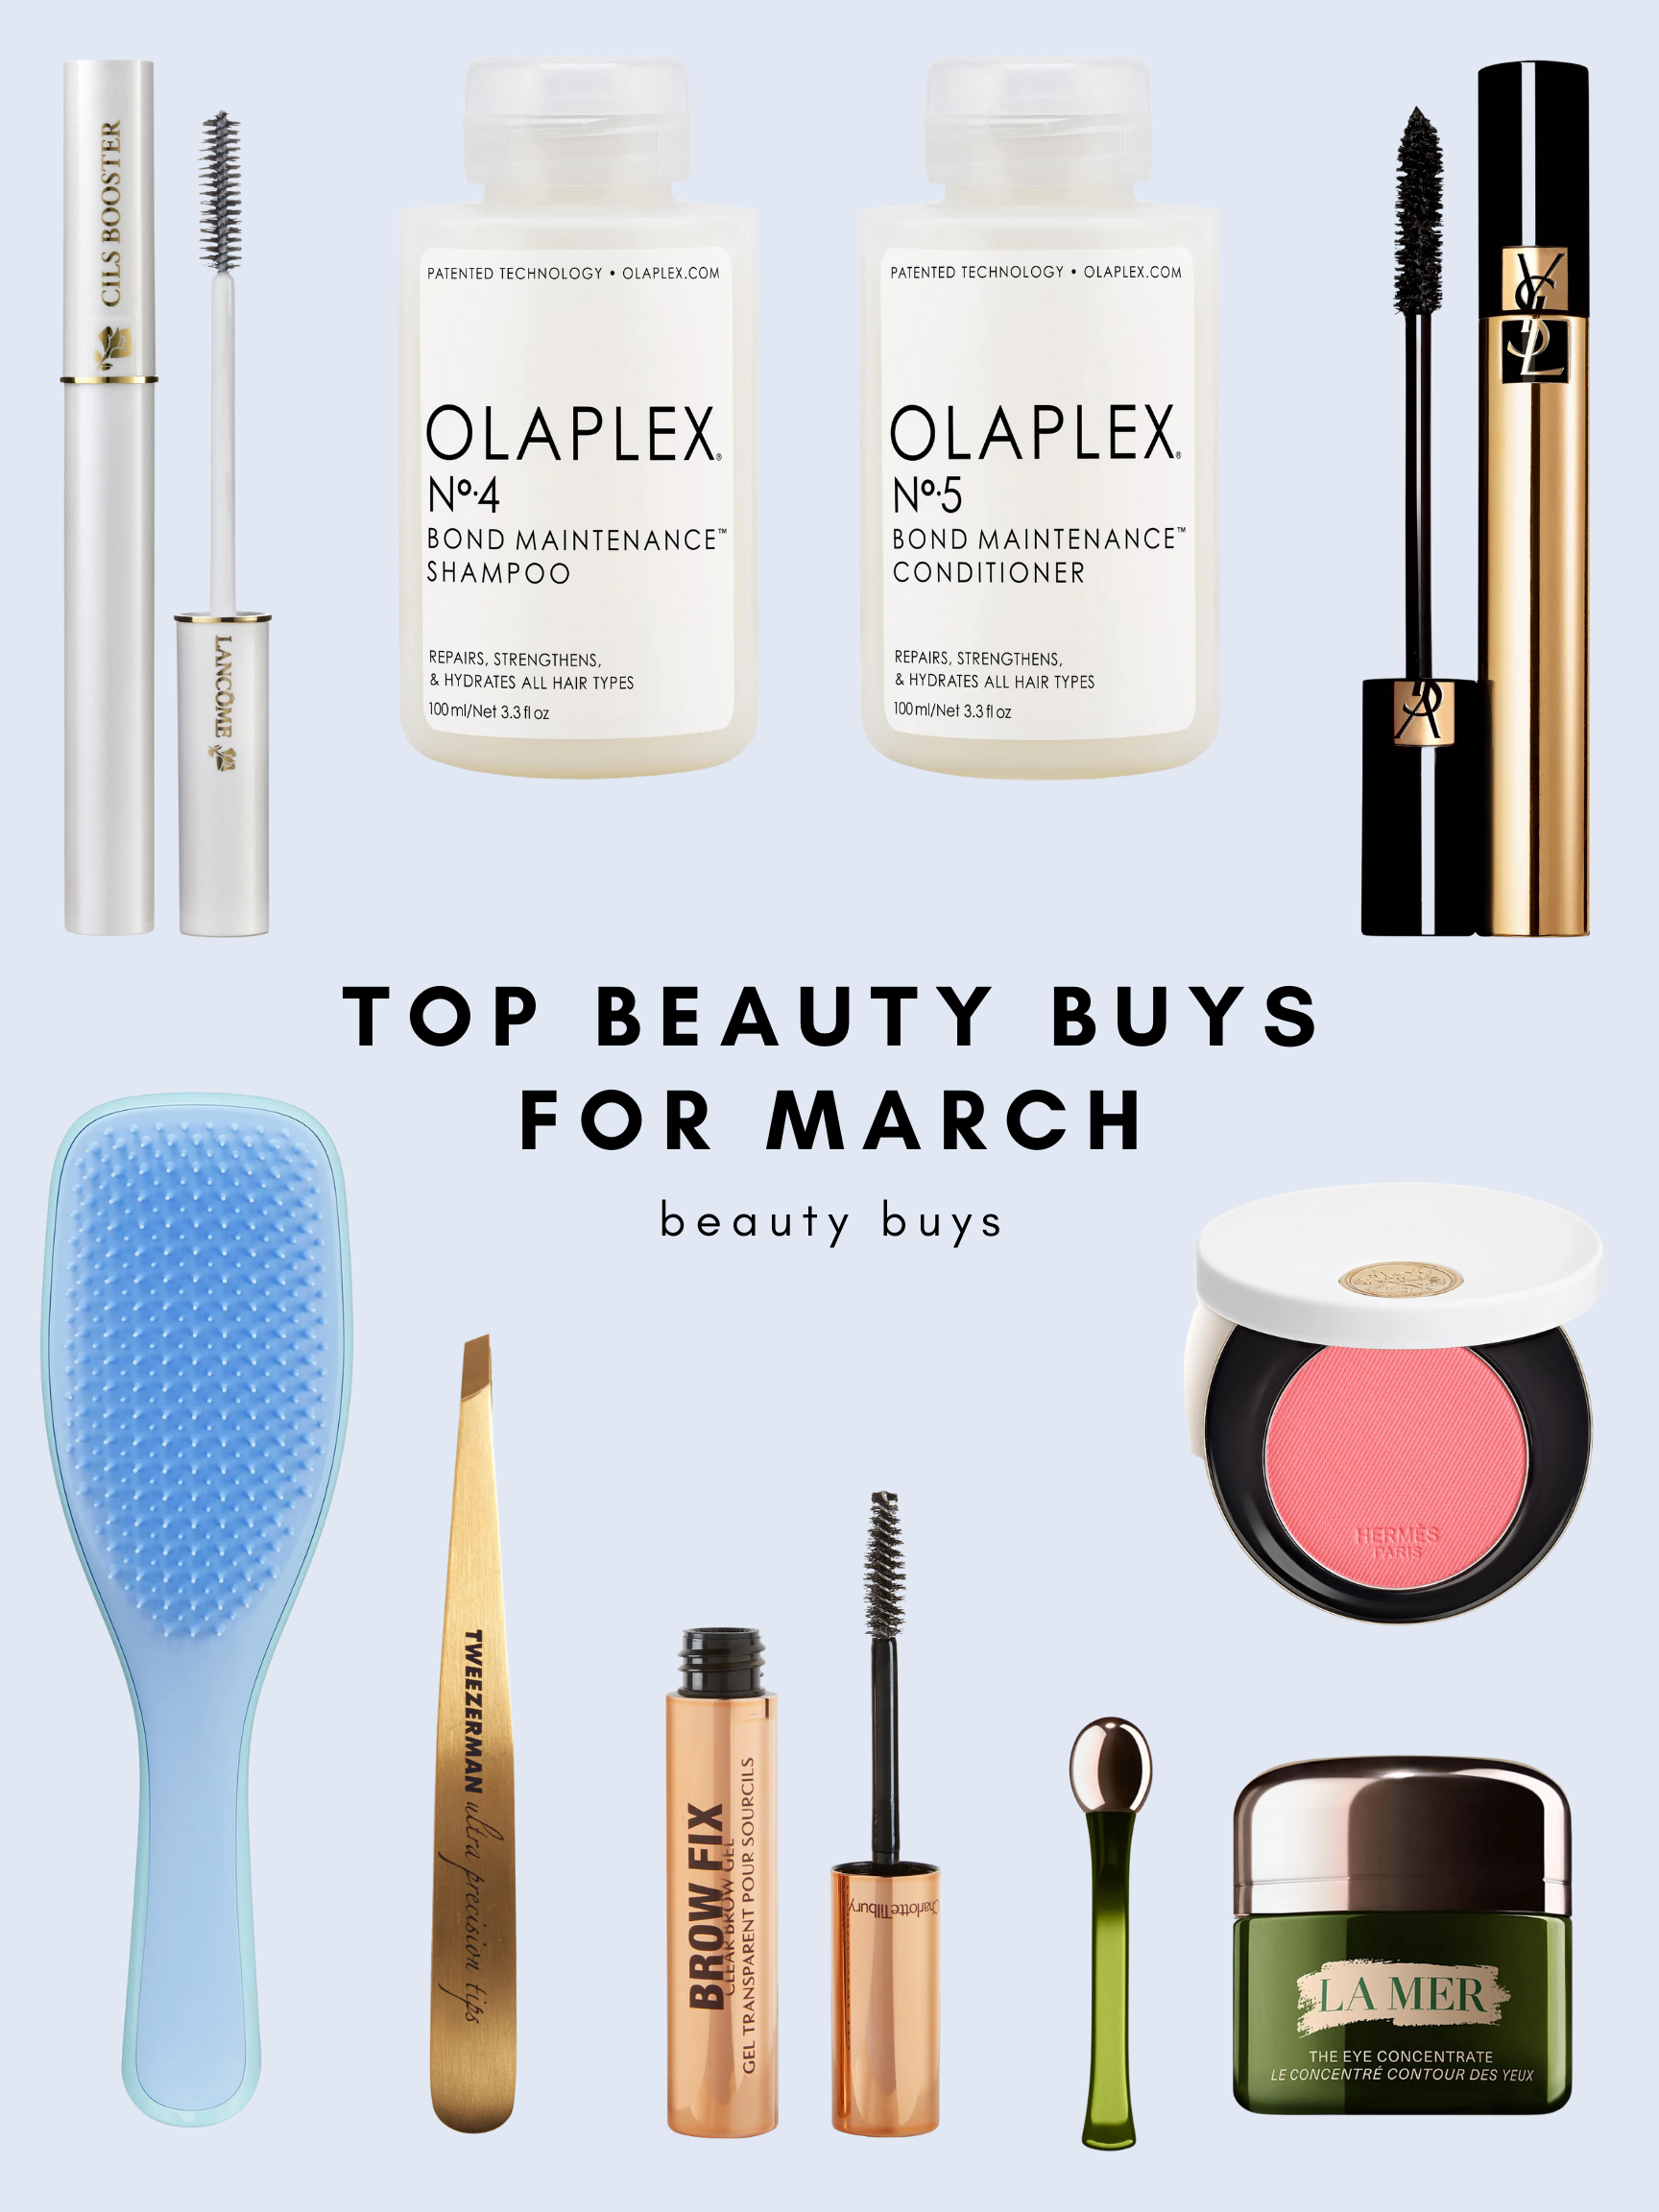 TOP BEAUTY BUYS FOR MARCH on Beautifully Seaside Blog